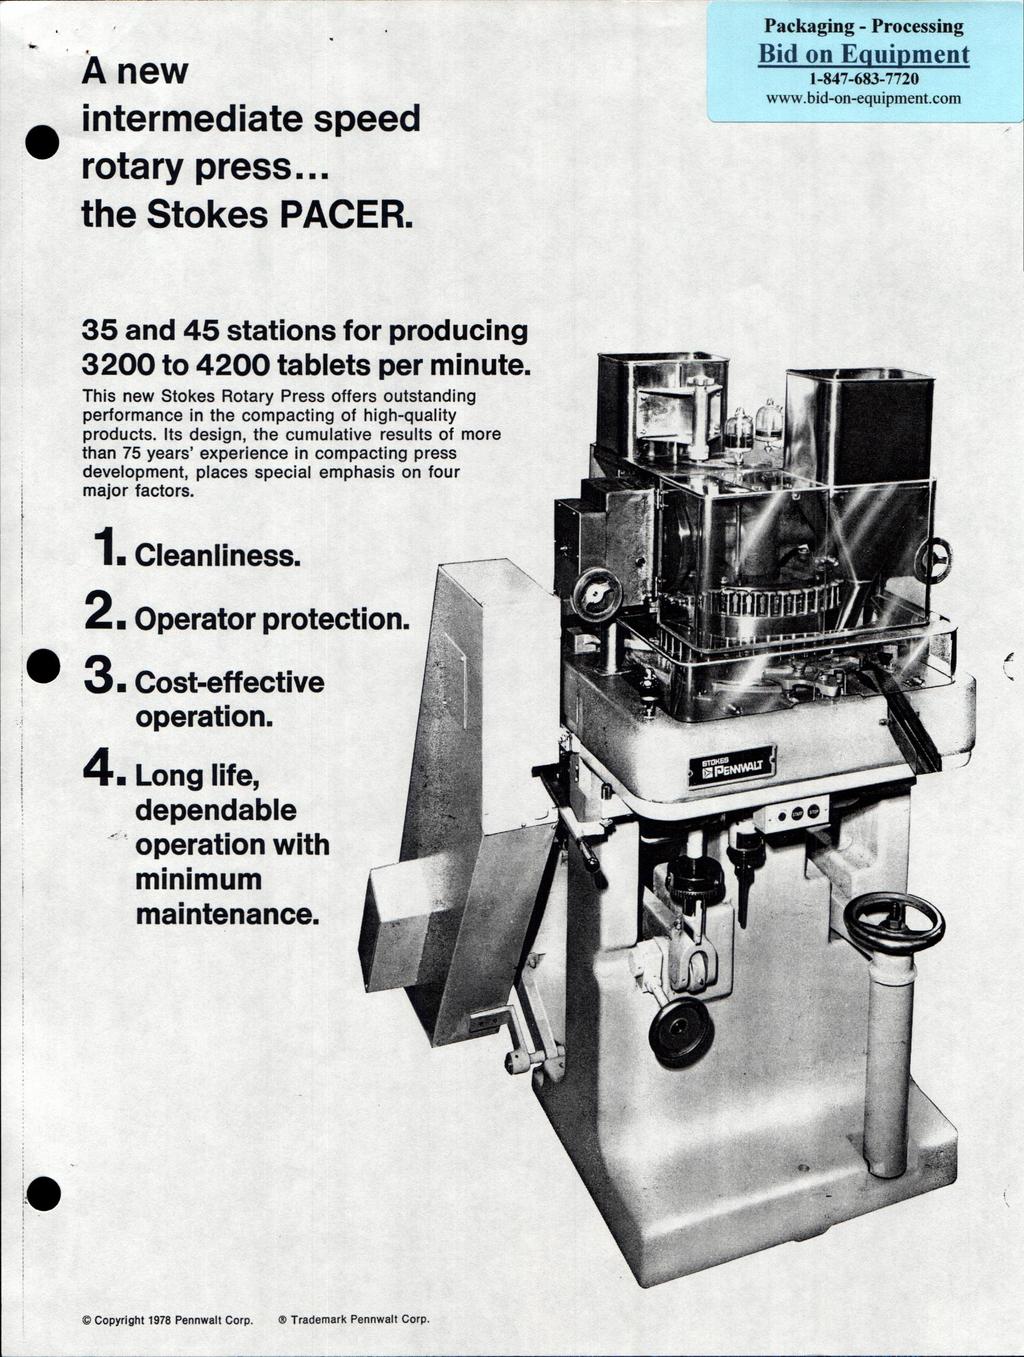 A new intermediate speed rotary press... the Stokes PACER. 35 and 45 stations for producing 3200 to 4200 tablets per minute.